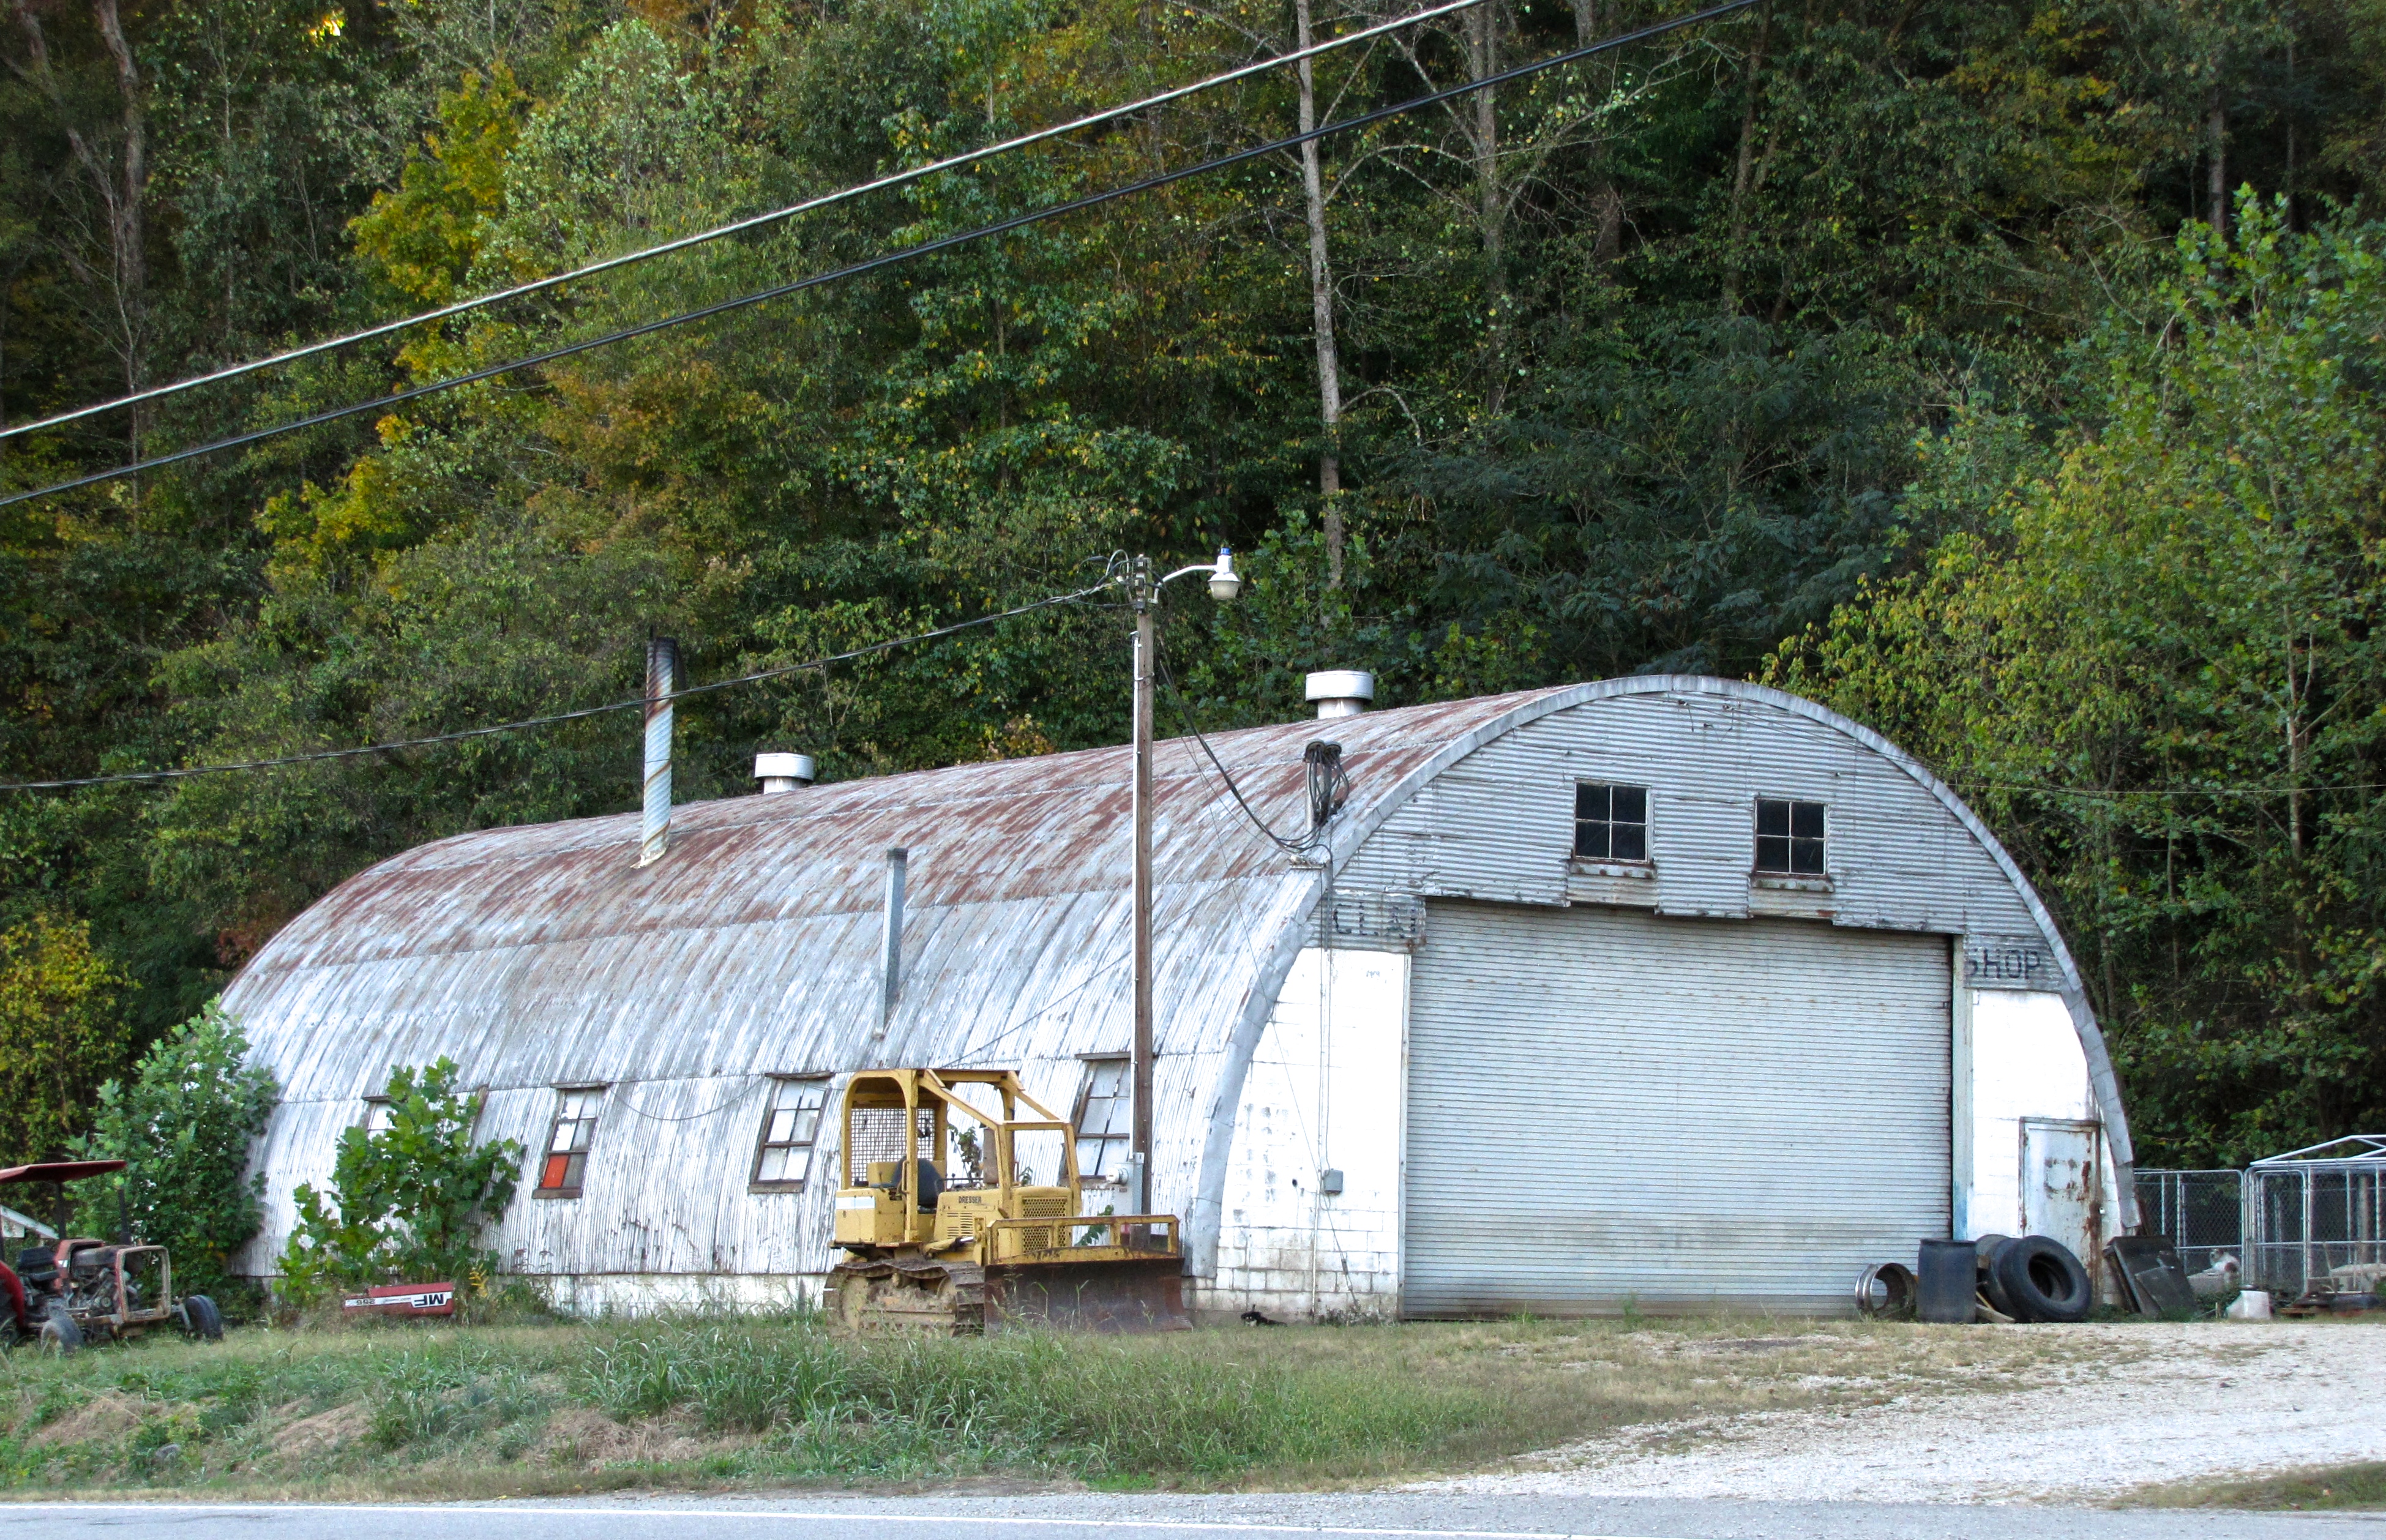 quonset hut in Salem, NH